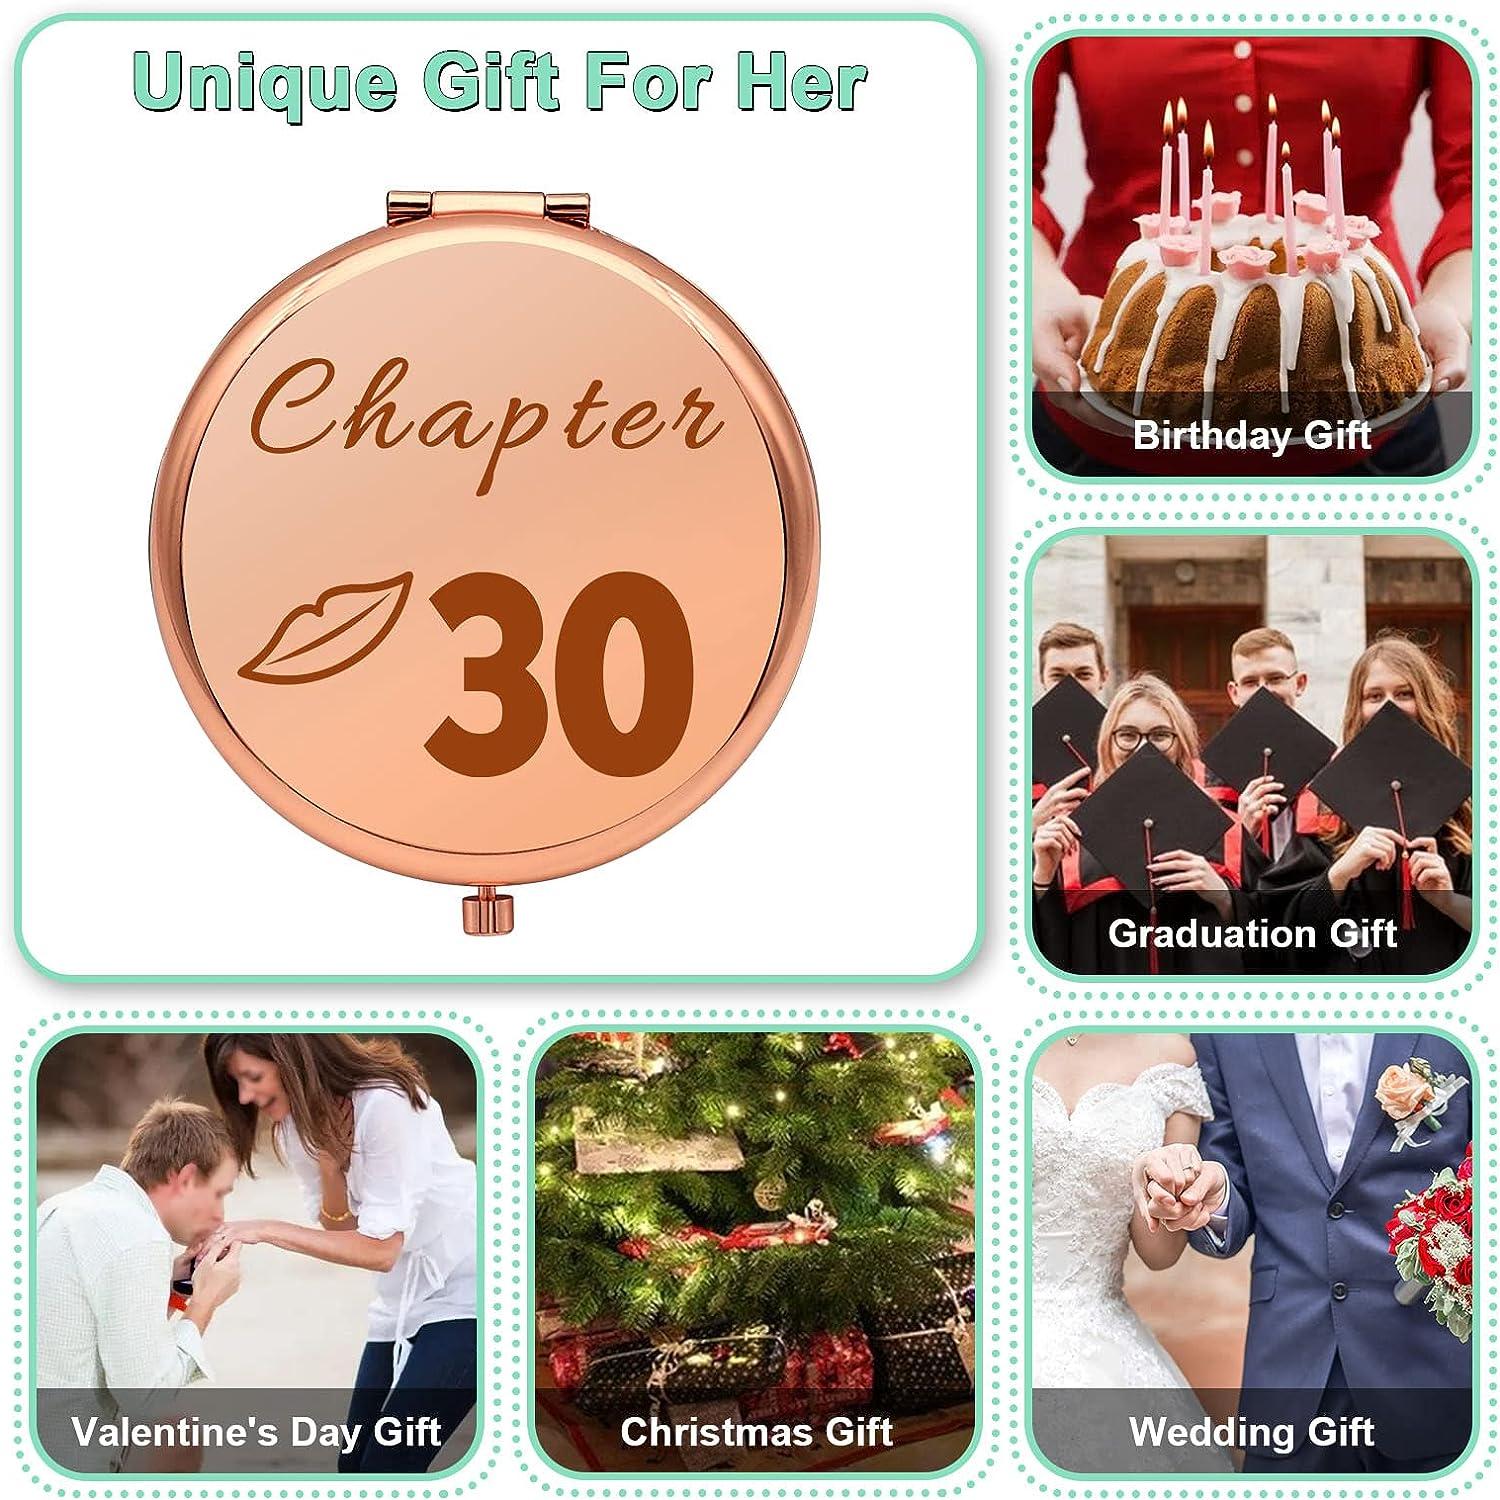 The best 30th birthday gift ideas - Reviewed